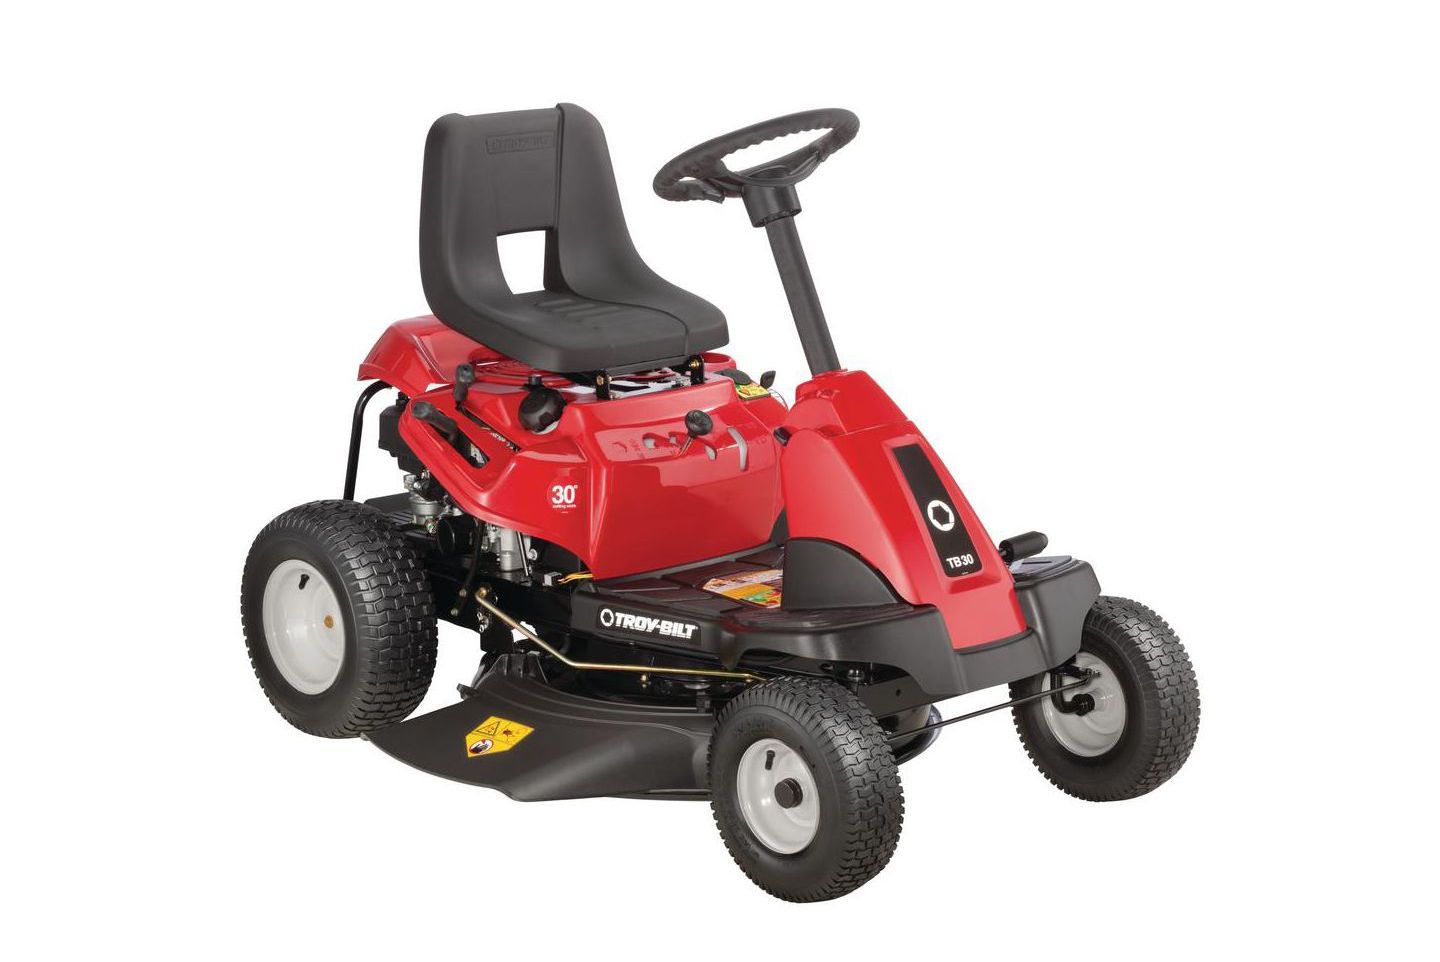 Best Riding Lawn Mowers 2019 Riding Mower Reviews